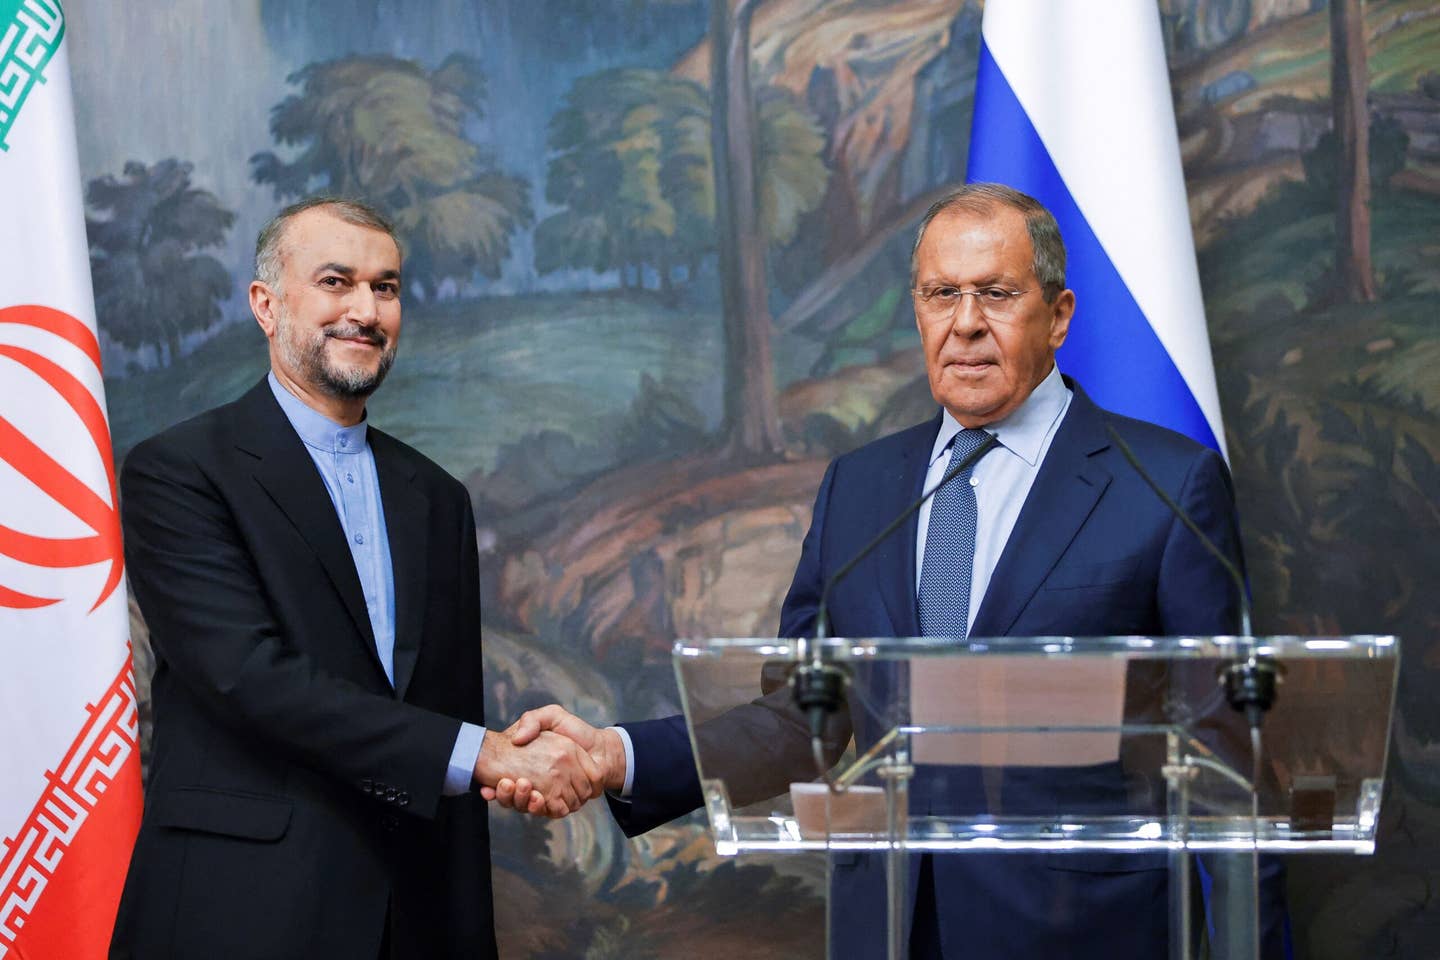 Russian Foreign Minister Sergei Lavrov (right) and Iranian Foreign Minister Hossein Amir-Abdollahian shake hands during a meeting in Moscow, on August 31, 2022. <em>Photo by MAXIM SHEMETOV/POOL/AFP via Getty Images</em>